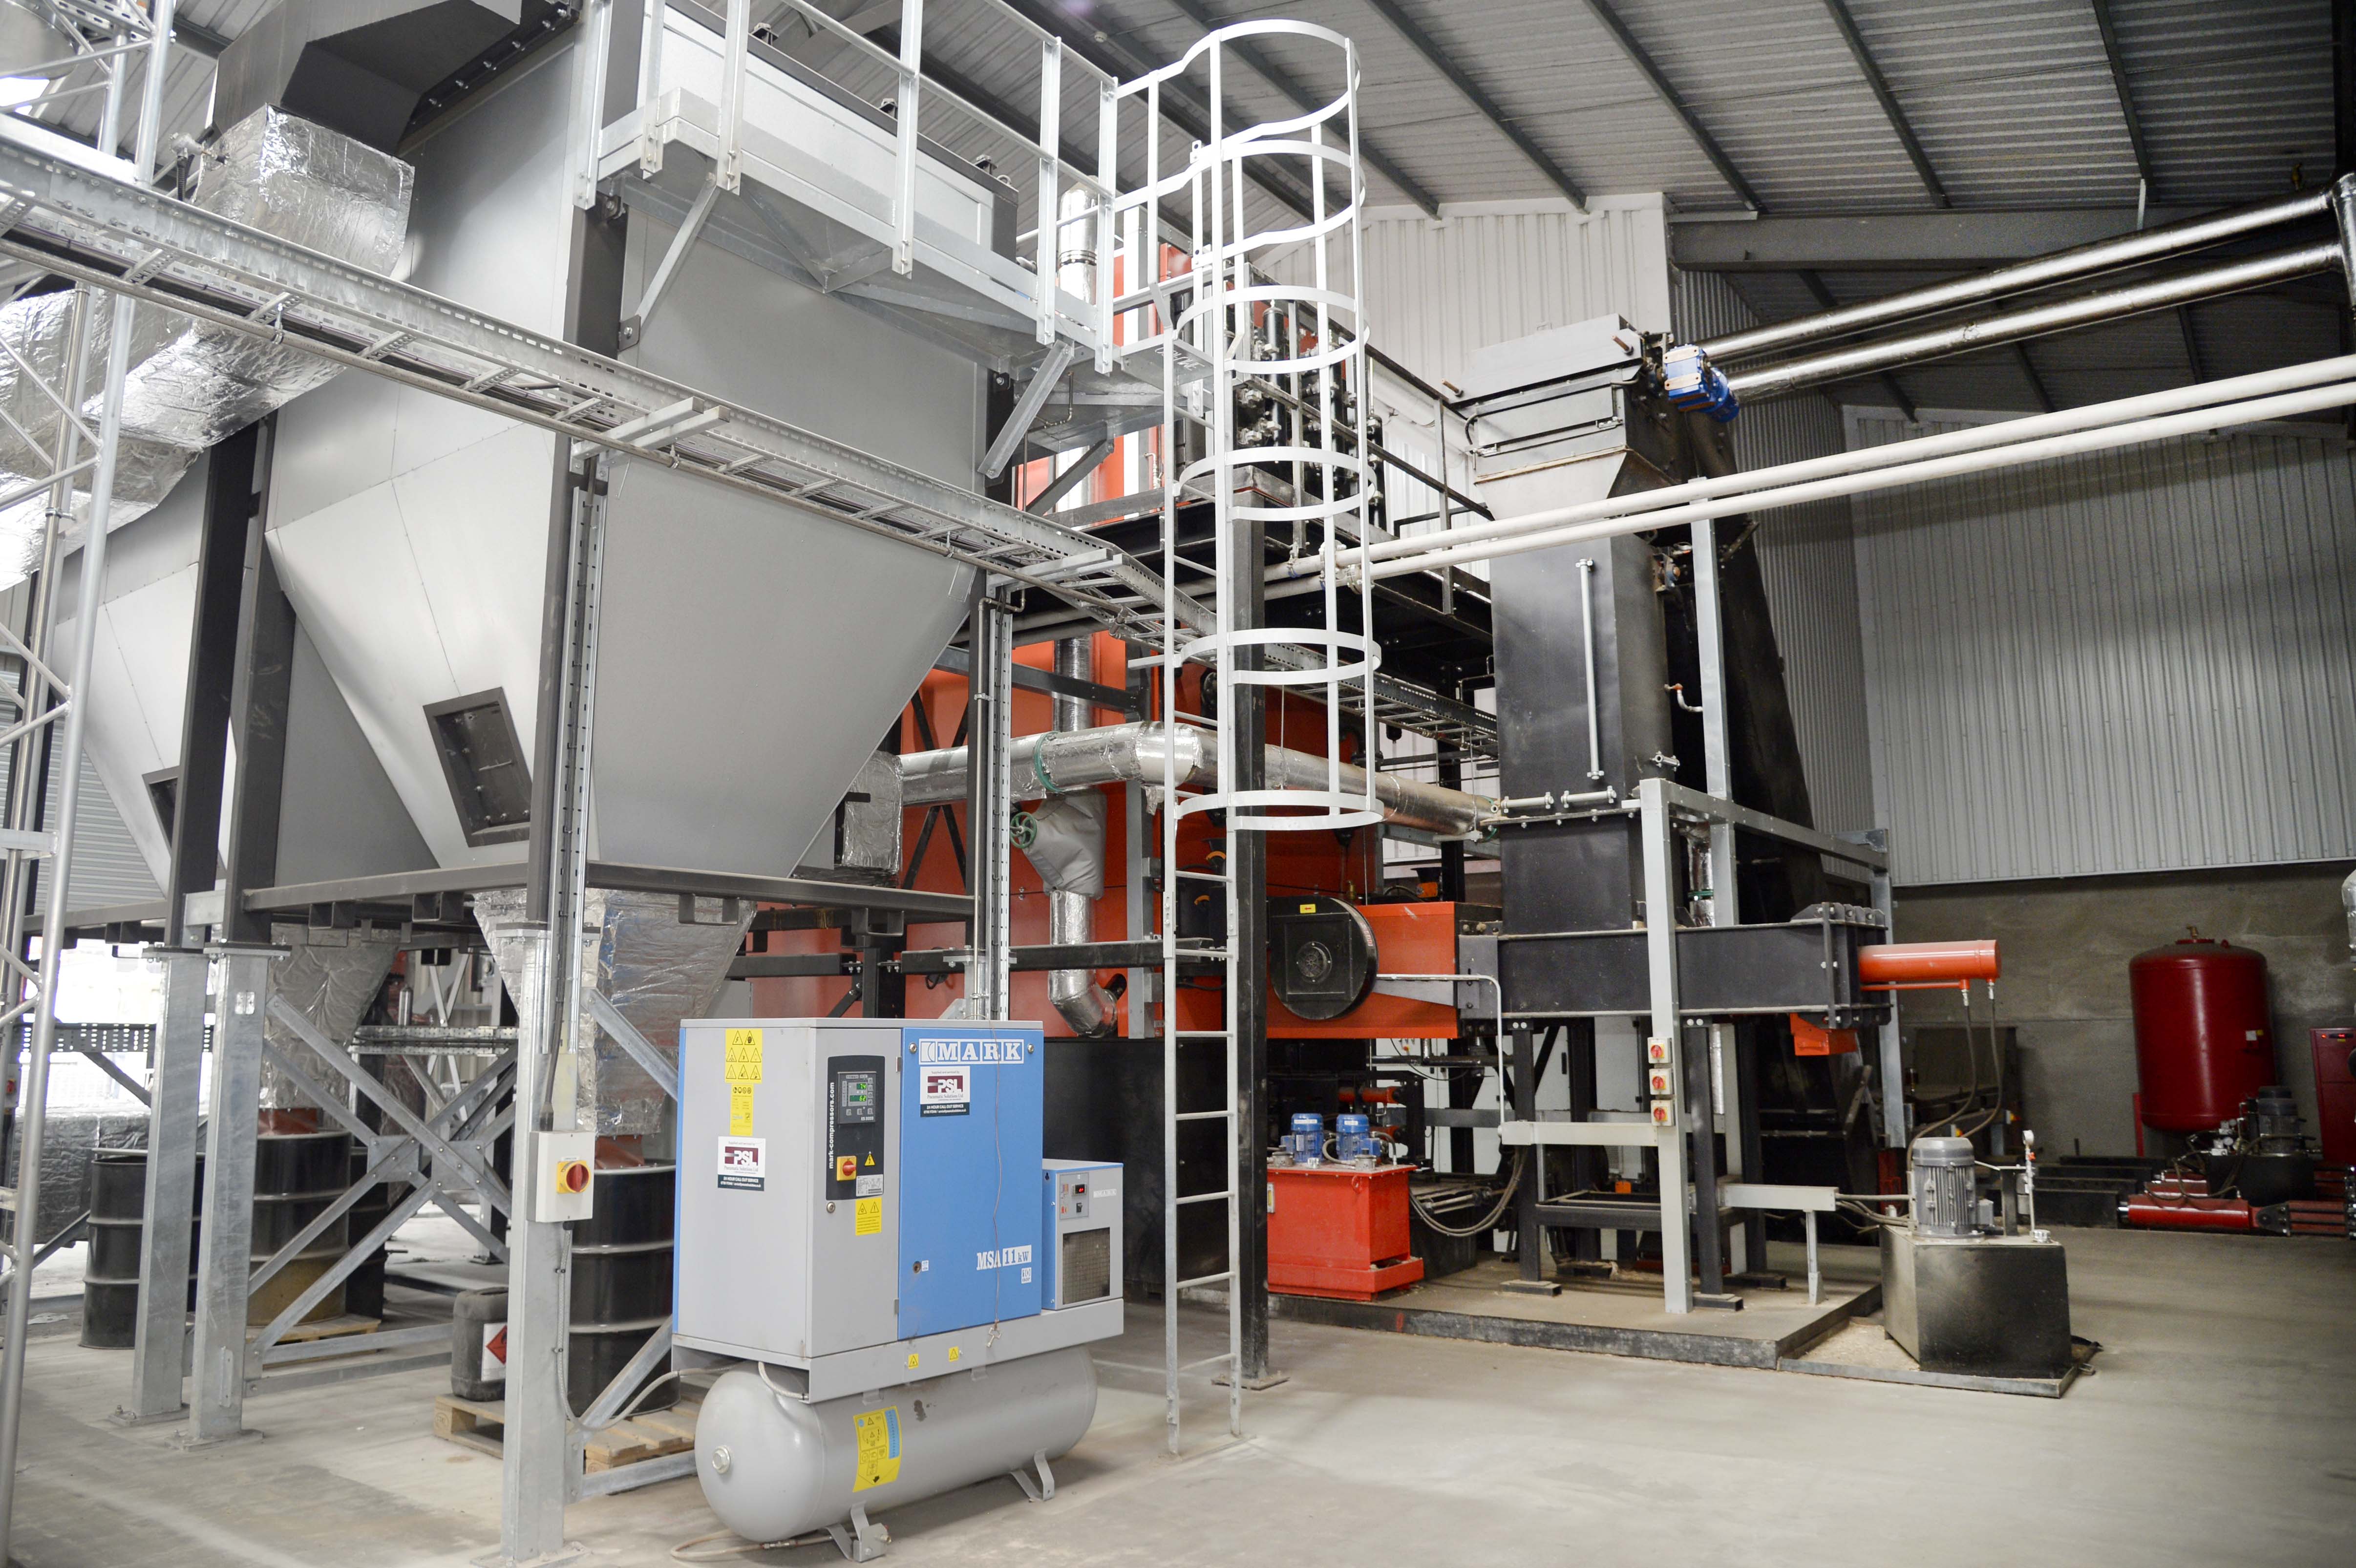 New biomass boiler is a step towards embracing the circular economy